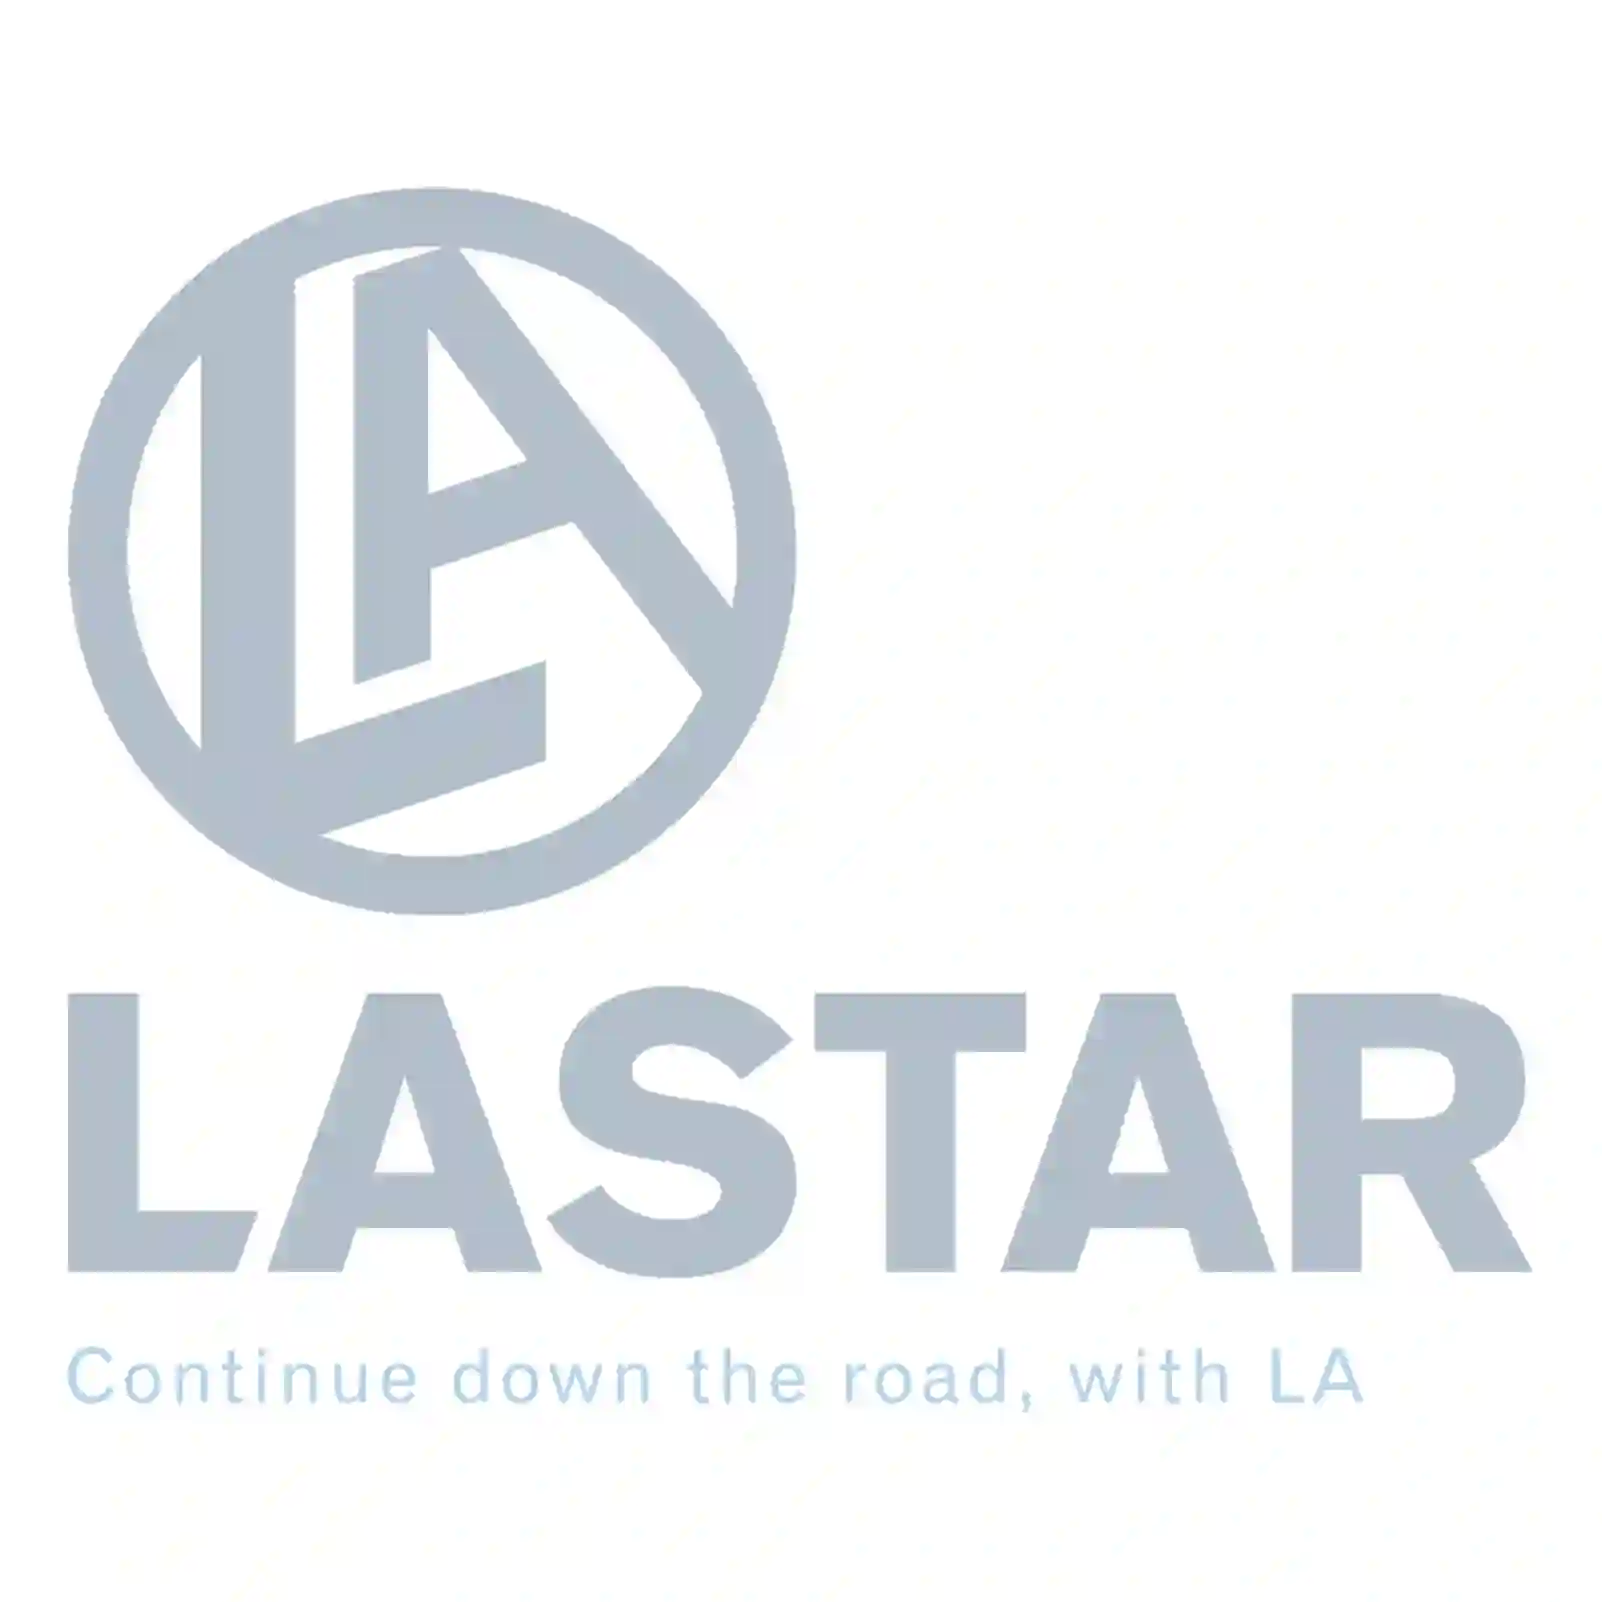  Frame, front grill || Lastar Spare Part | Truck Spare Parts, Auotomotive Spare Parts